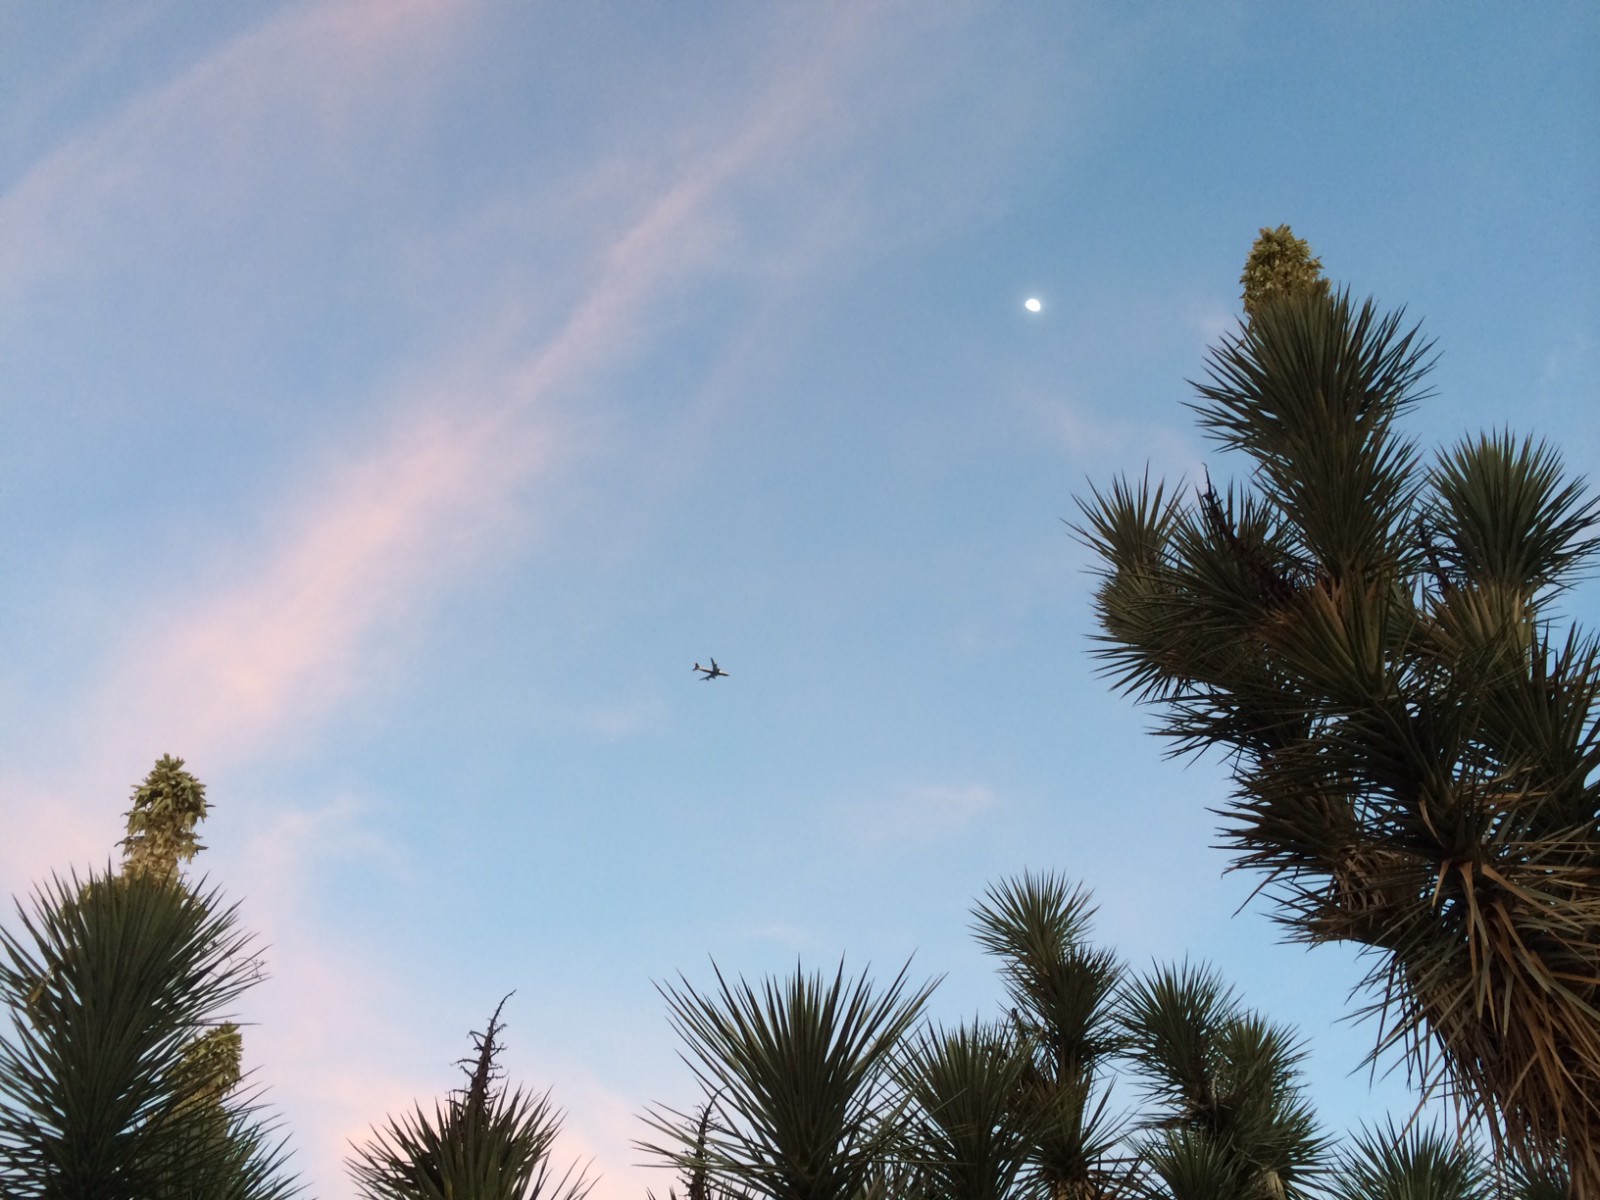 BA289 coming into Arizona in a beautiful sky with a moon and cactus.